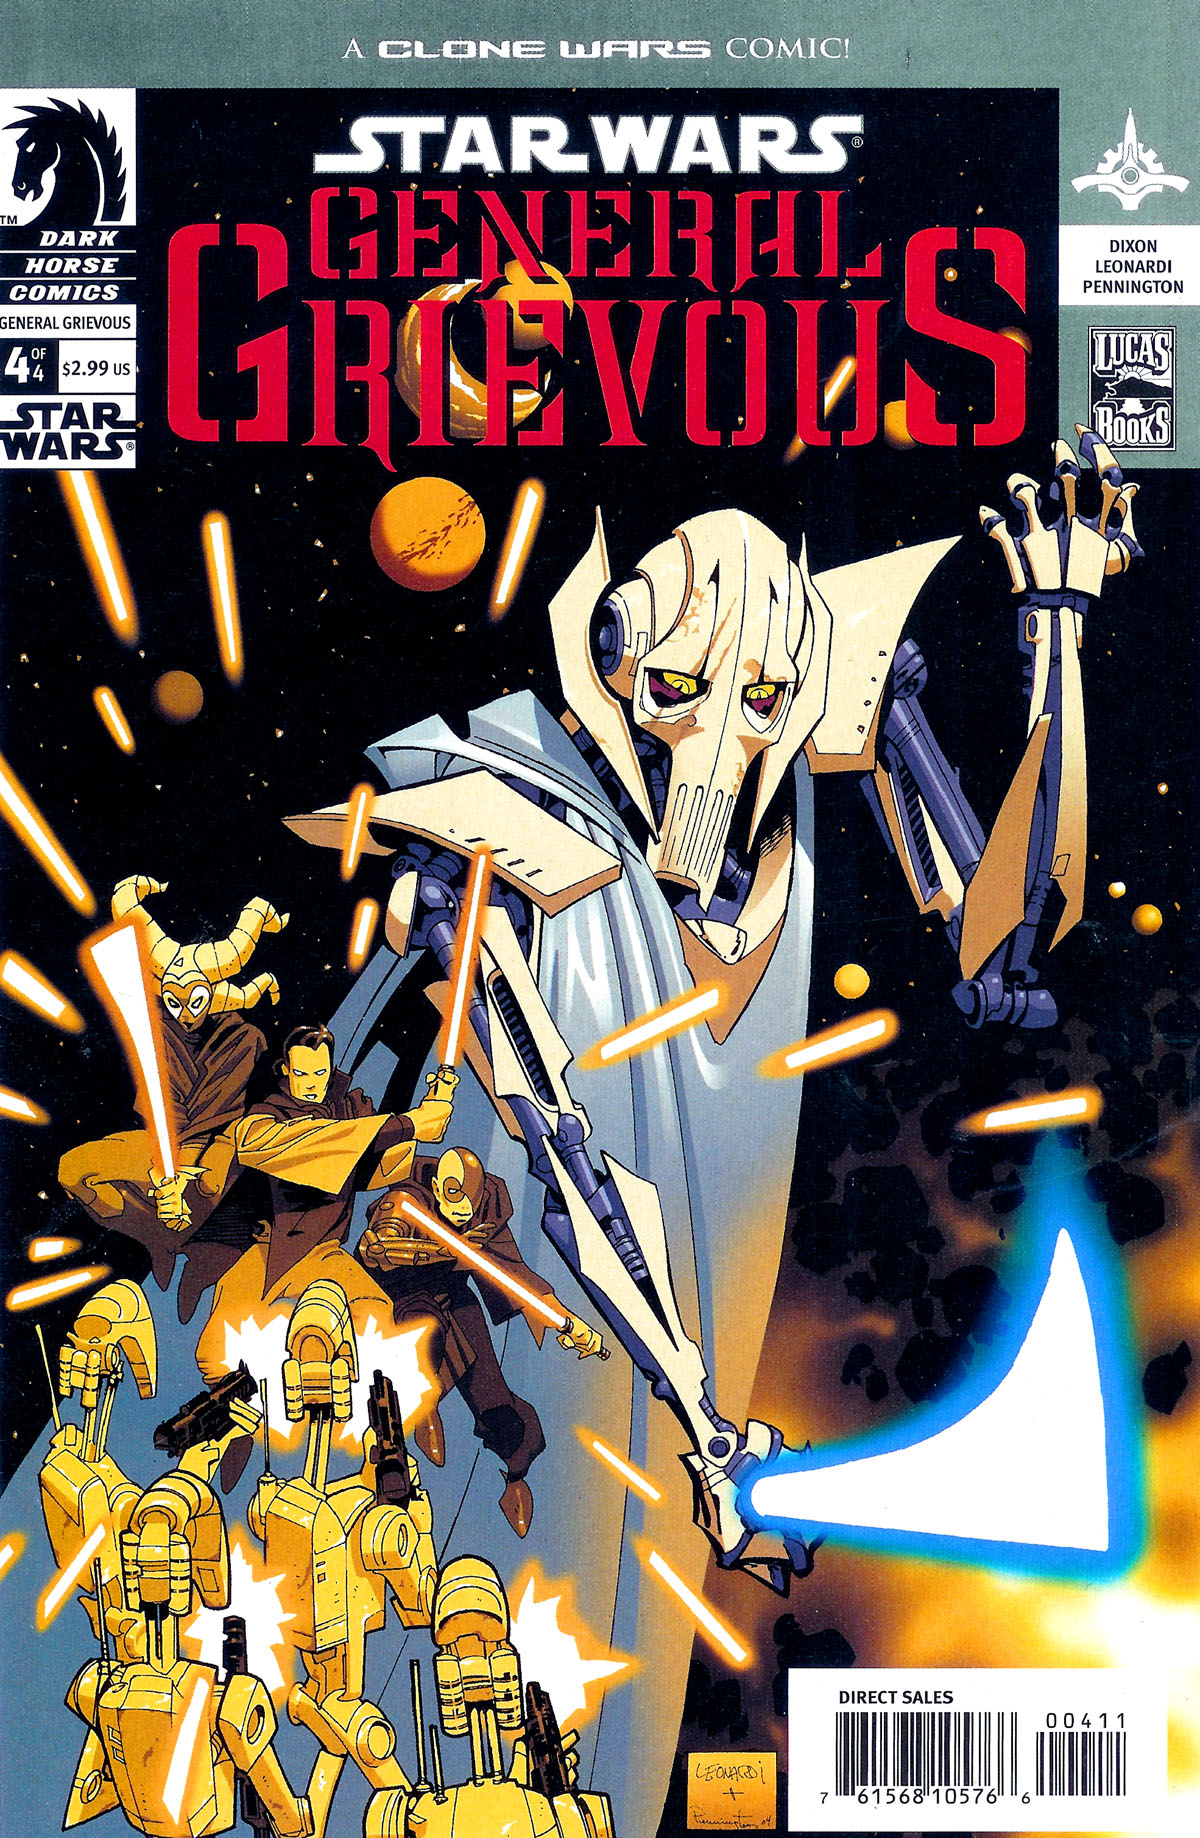 Star Wars: General Grievous issue 4 - Page 1